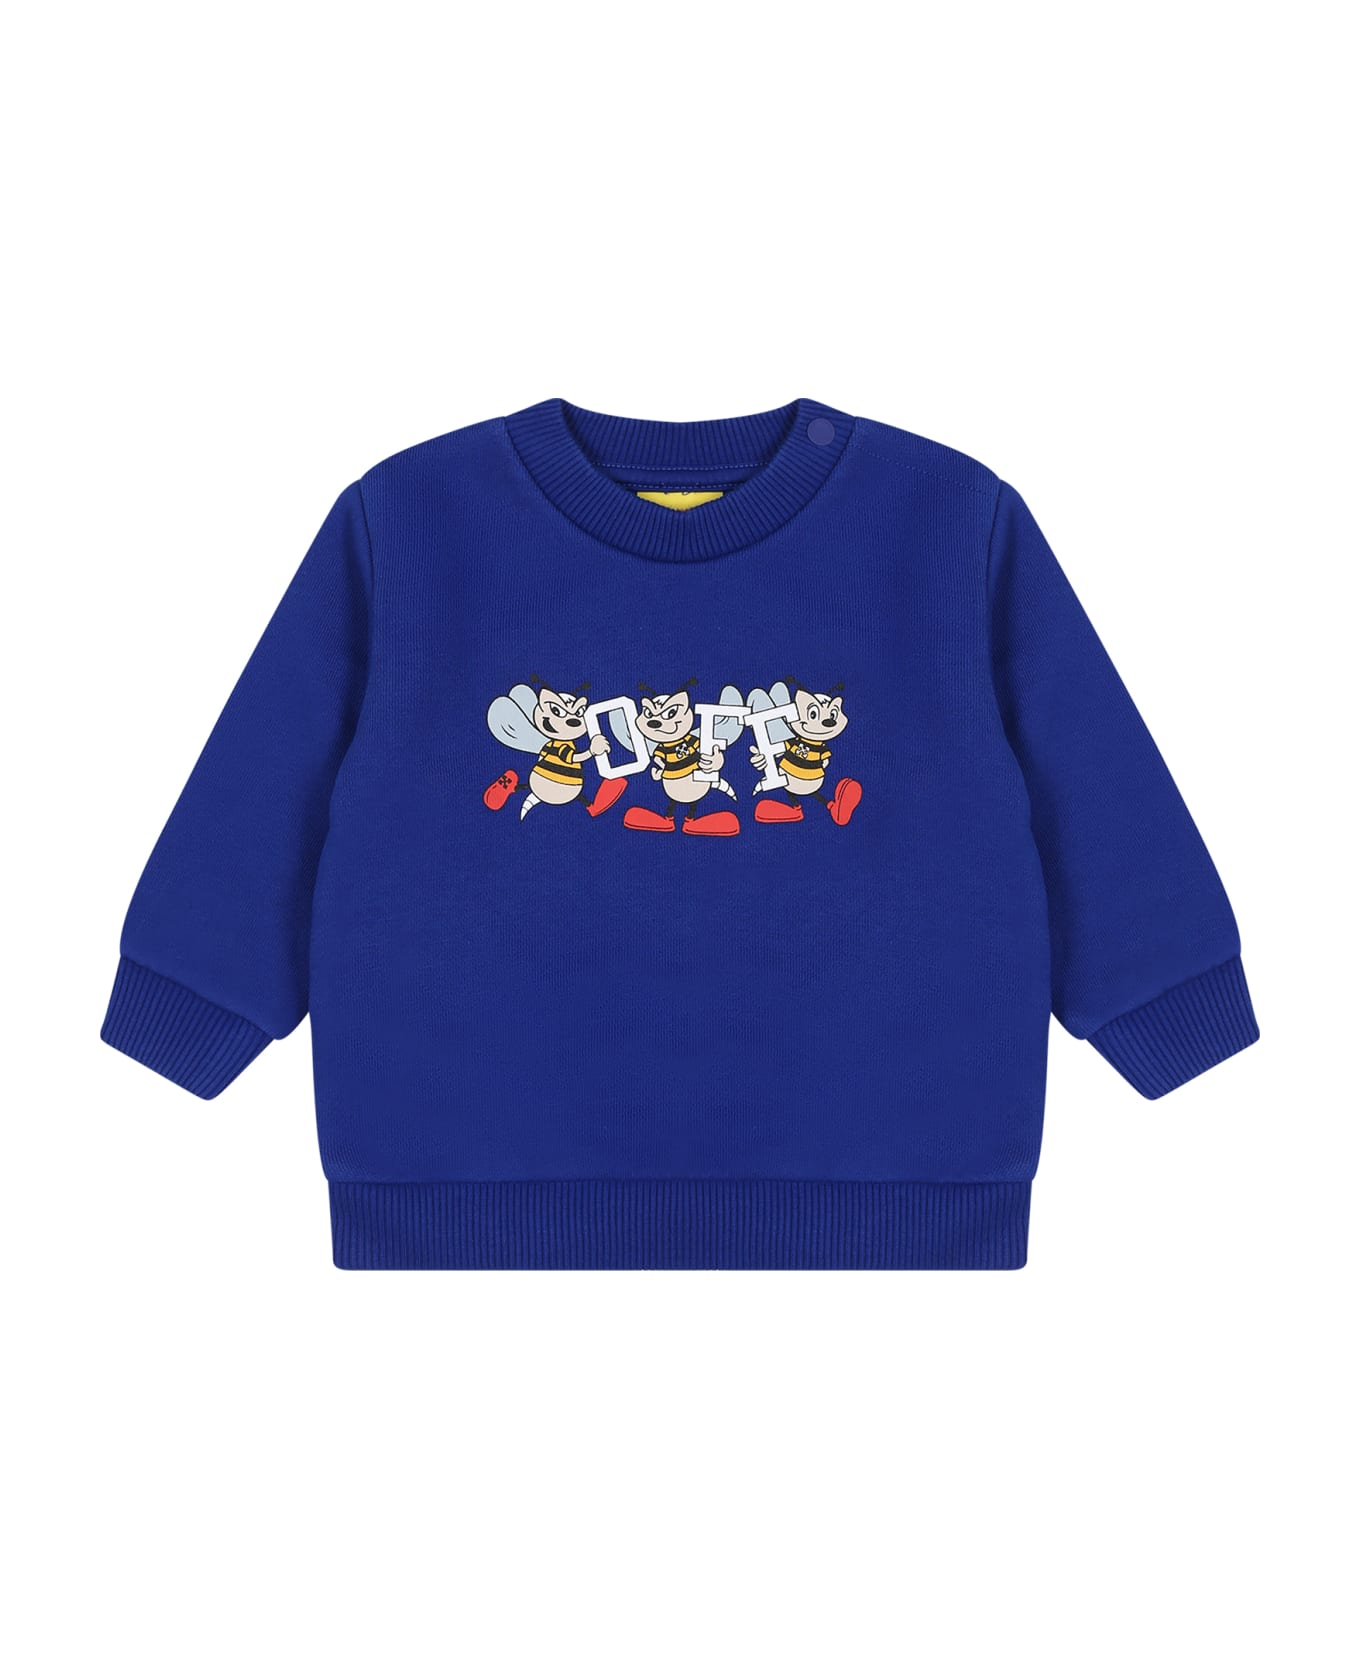 Off-White Blue Sweatshirt For Baby Boy With Mascot Logo Print - Blue